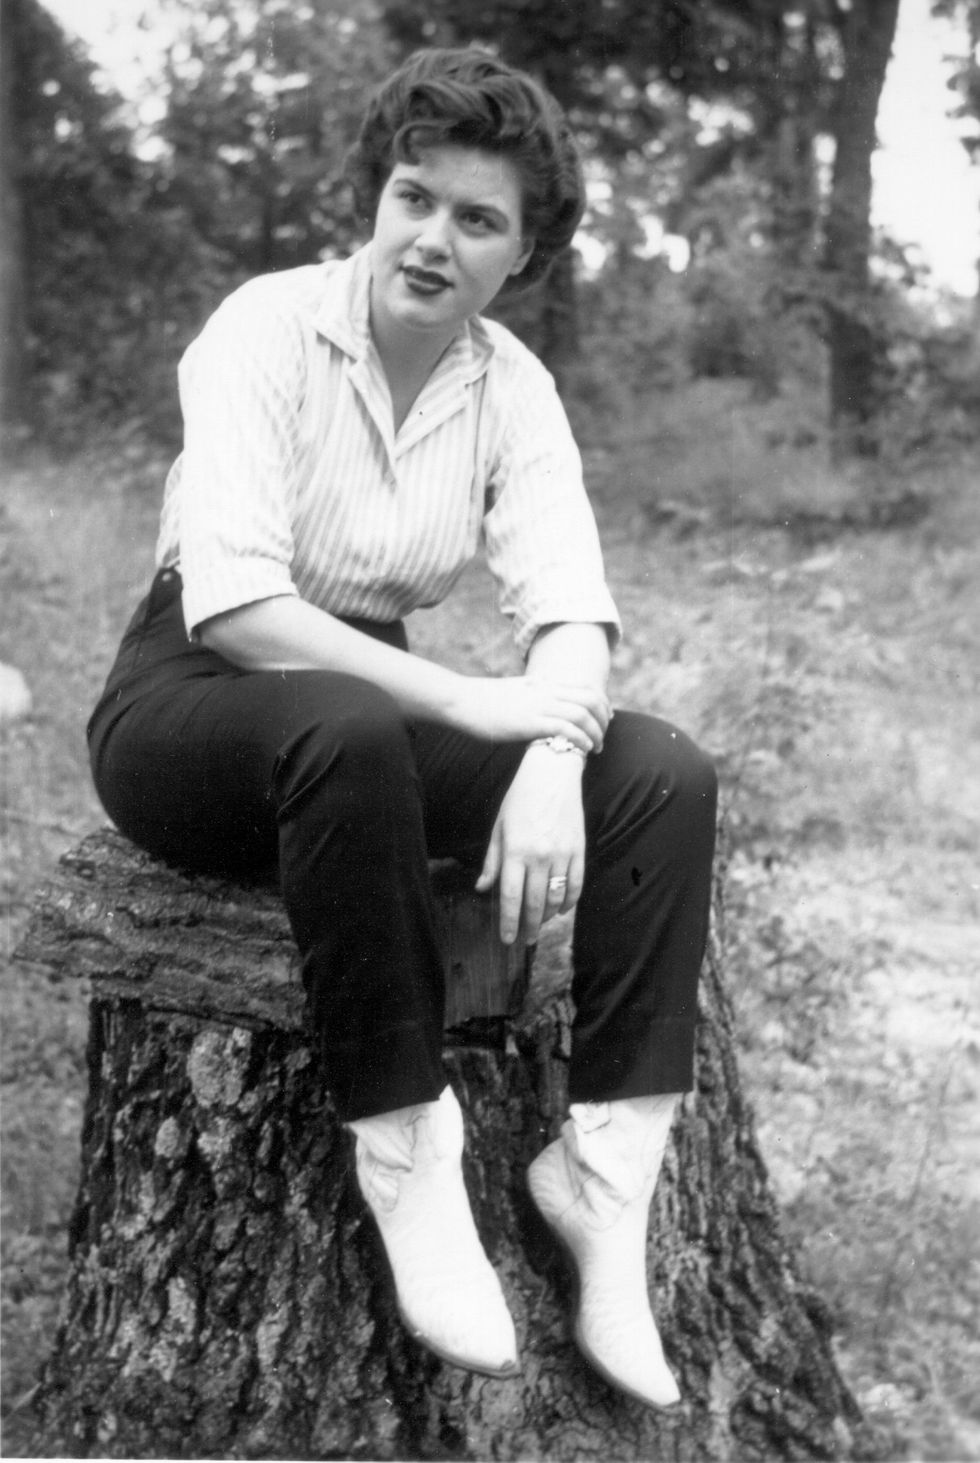 patsy cline sitting on a tree stump and looking right out of frame